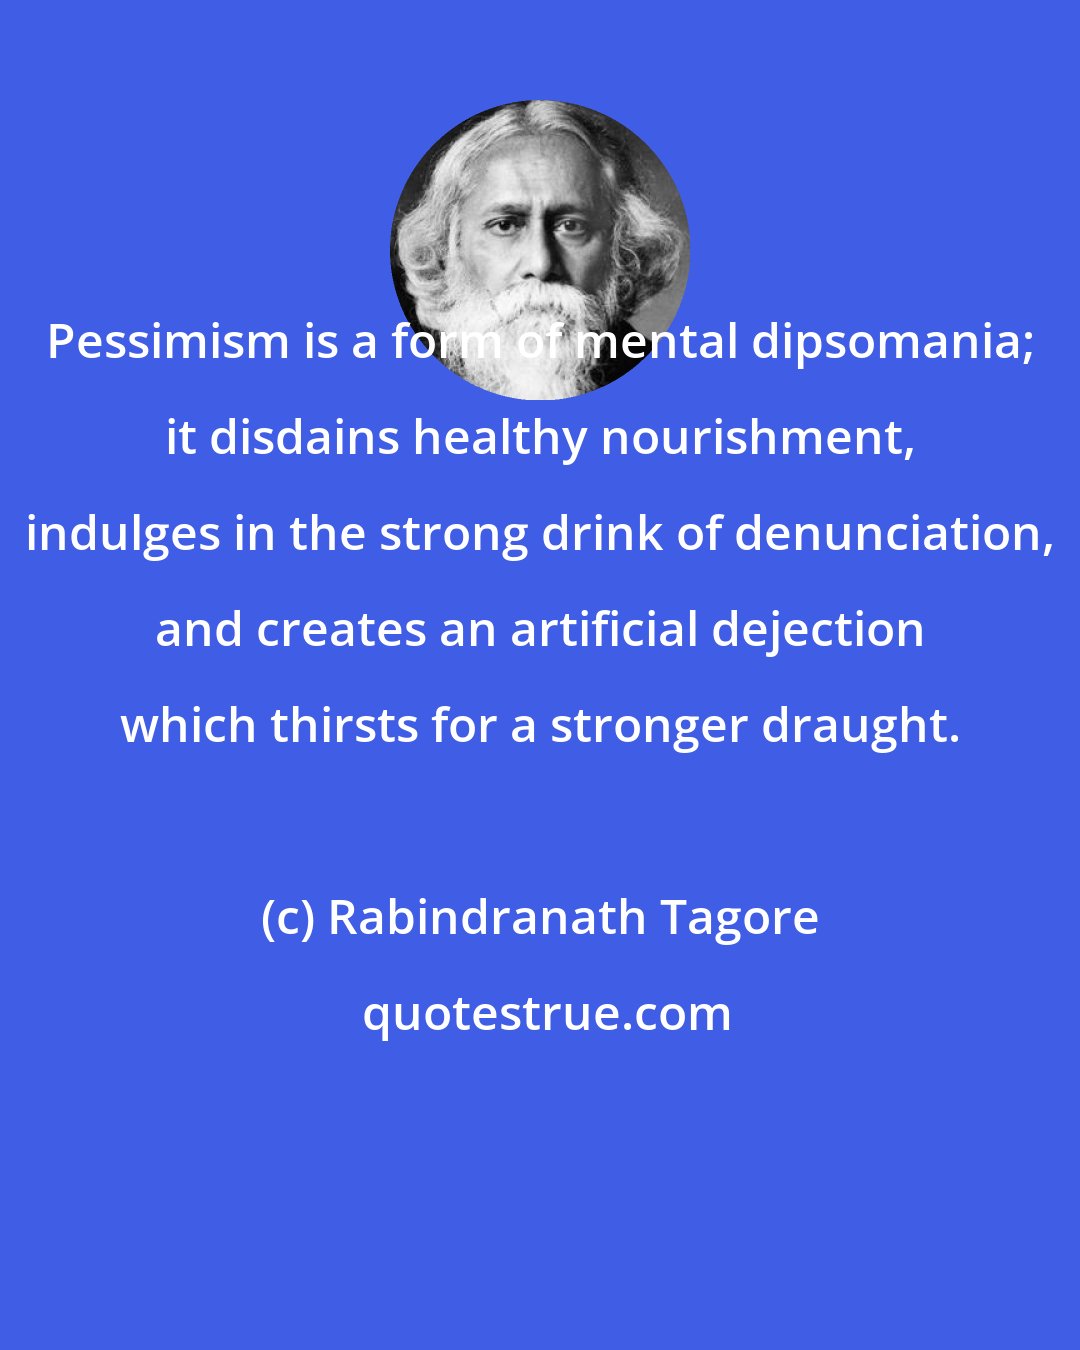 Rabindranath Tagore: Pessimism is a form of mental dipsomania; it disdains healthy nourishment, indulges in the strong drink of denunciation, and creates an artificial dejection which thirsts for a stronger draught.